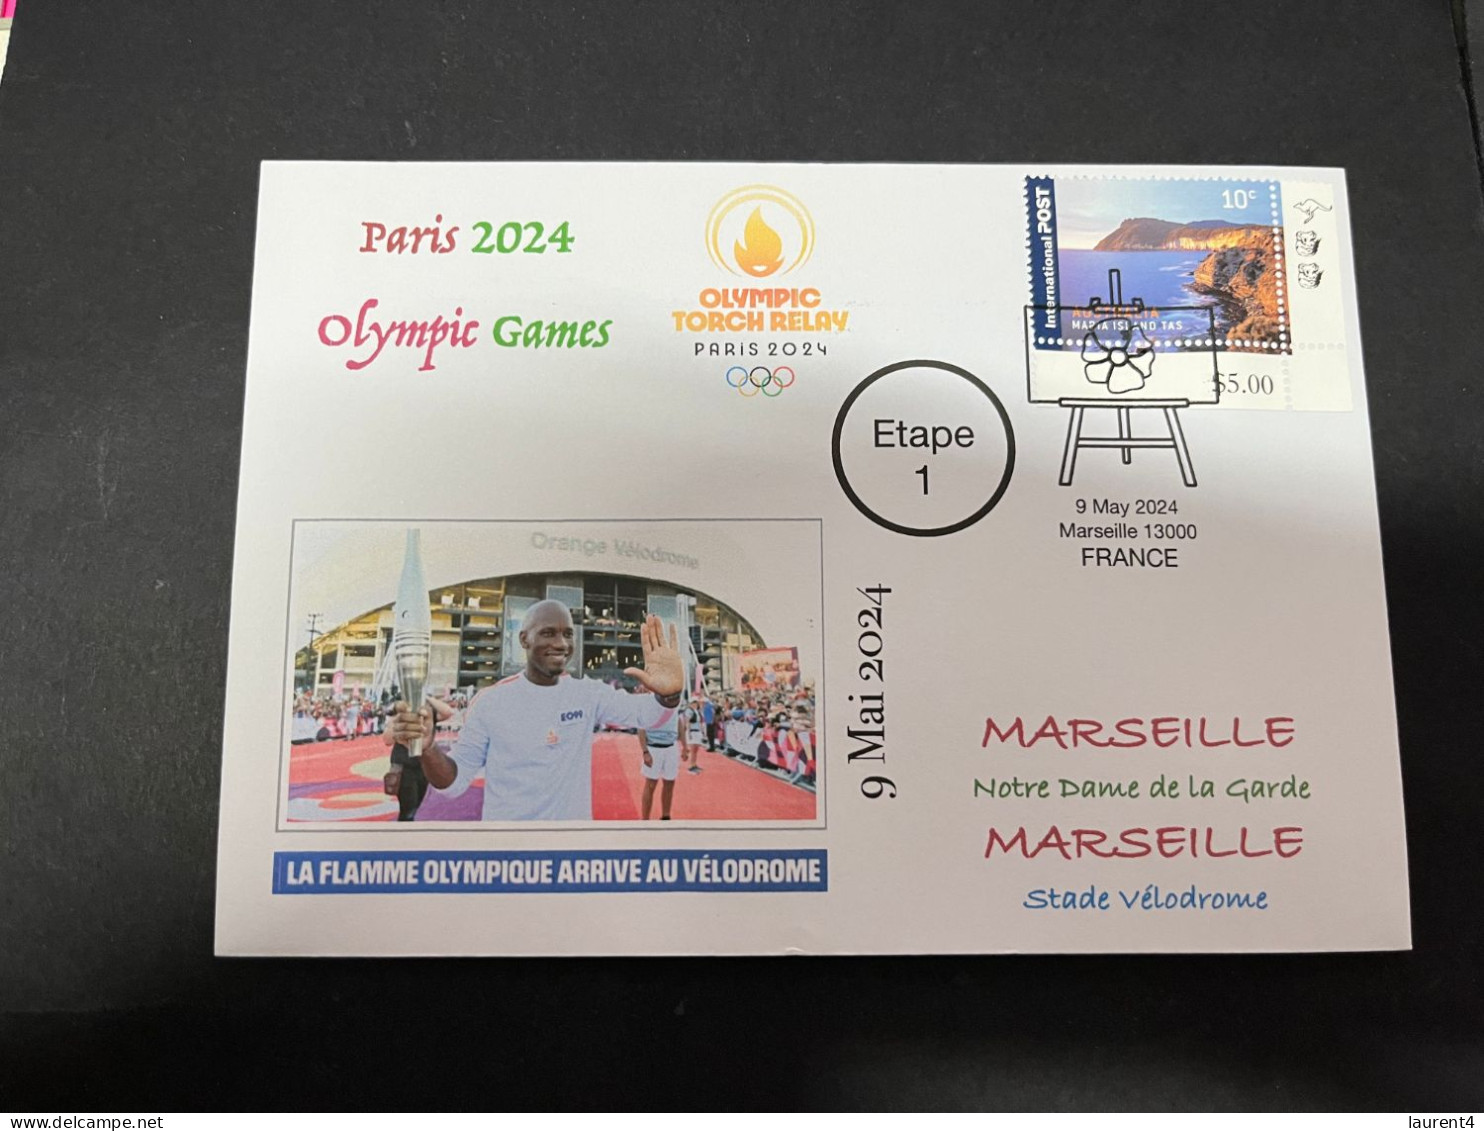 10-5-2024 (4 Z 37) Paris Olympic Games 2024 - Torch Relay (Etape 1) In Marseille (9-5-2024) With OZ Stamp - Sommer 2024: Paris